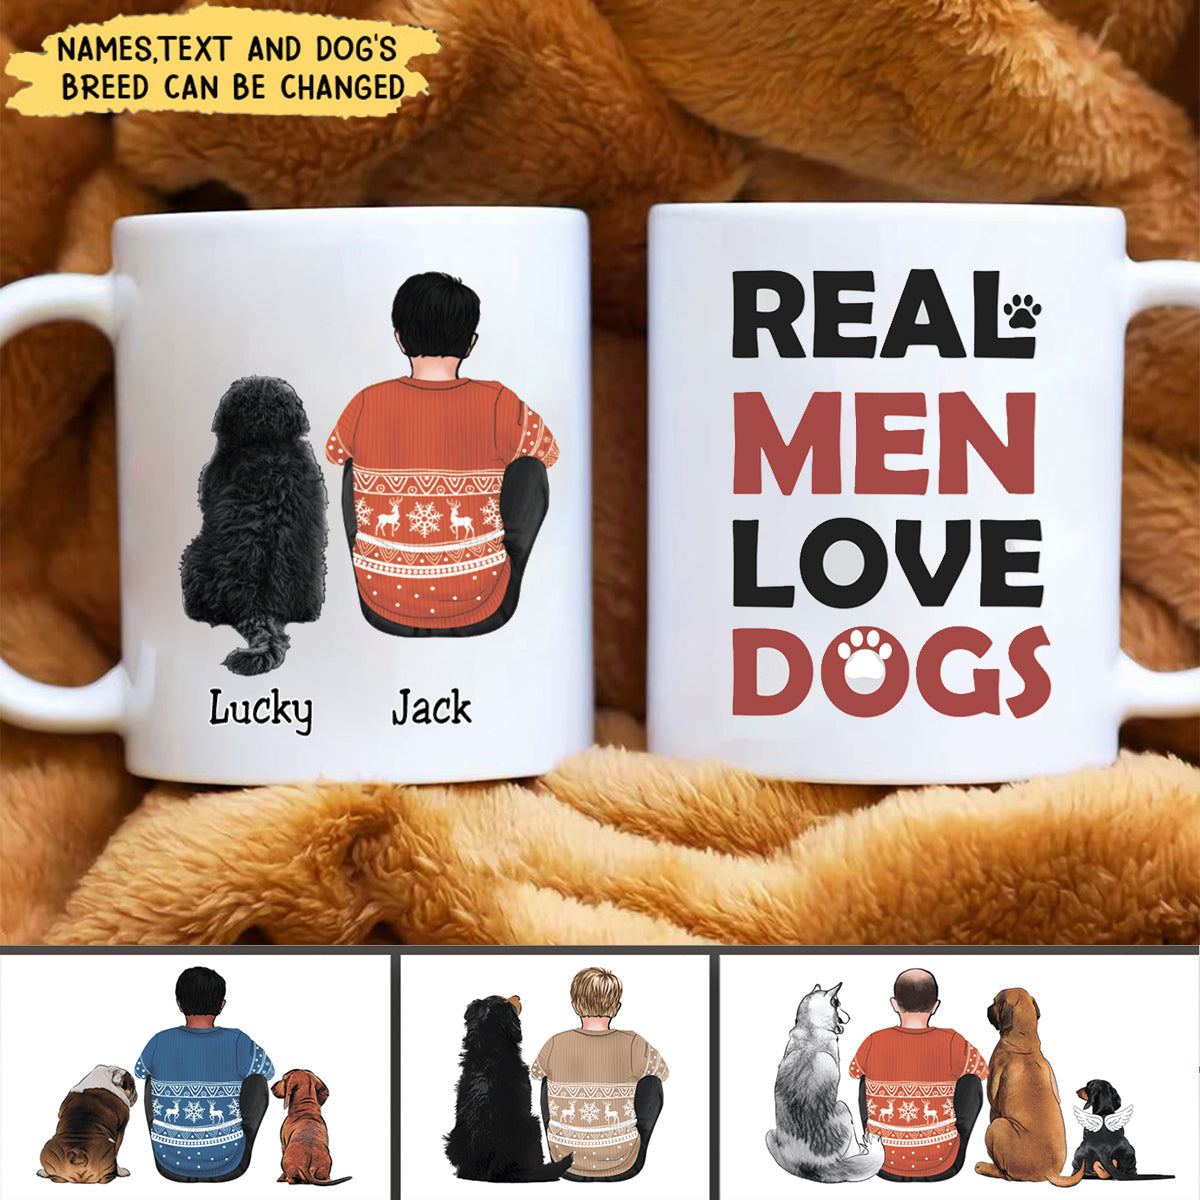 Dogs & Man - Real Man Love Dogs - Personalized Mug